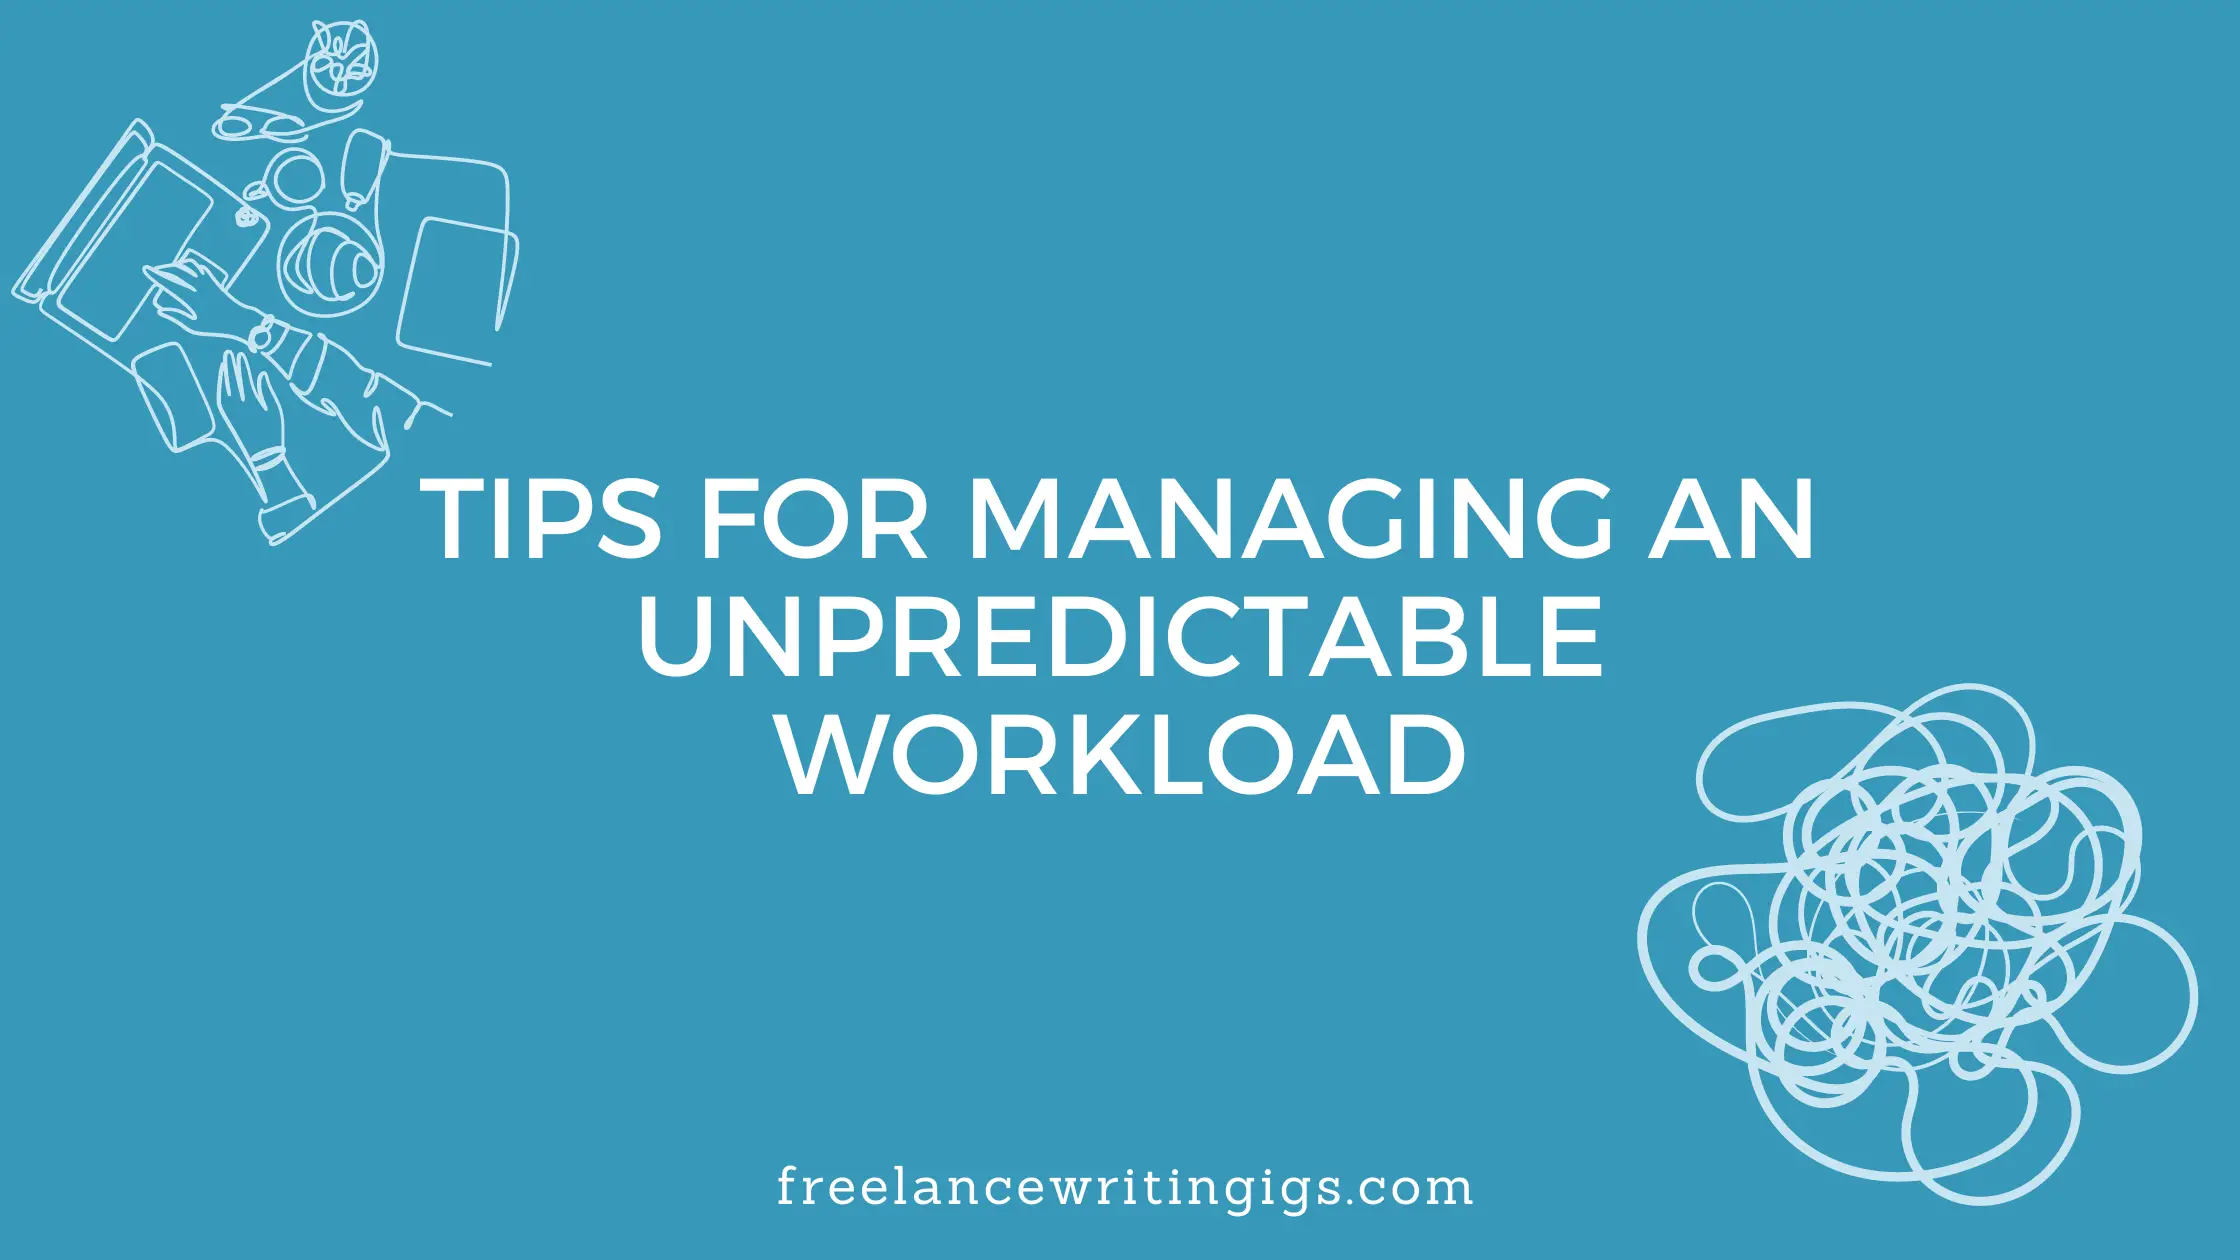 9 Tips for Managing an Unpredictable Workload